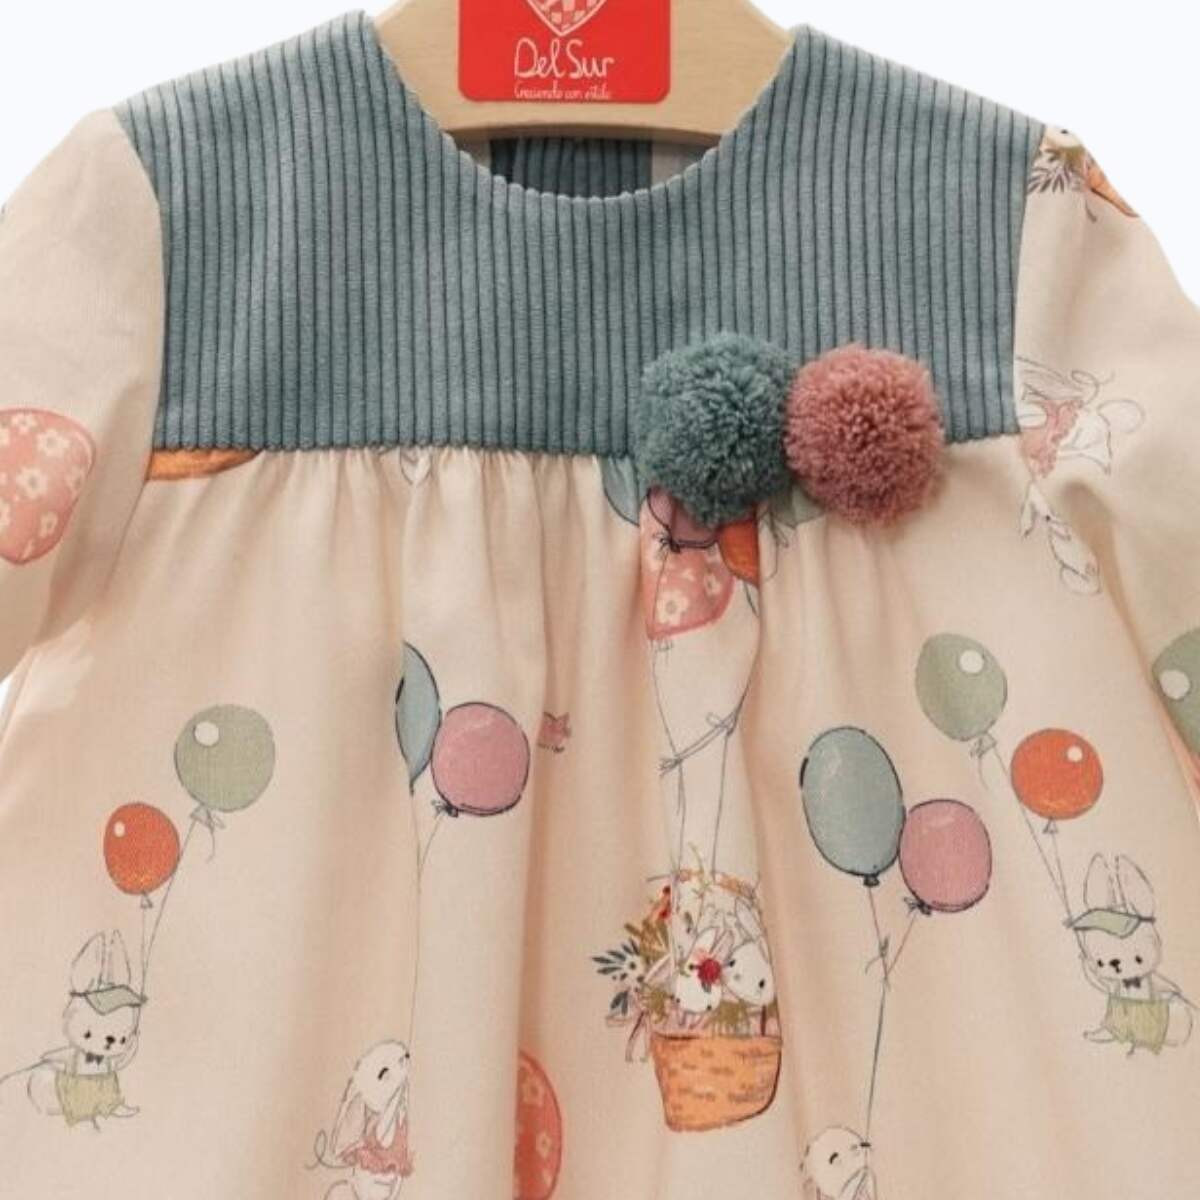 BALLOONS PRINTED DRESS WITH POMPOMS DELSUR - 2